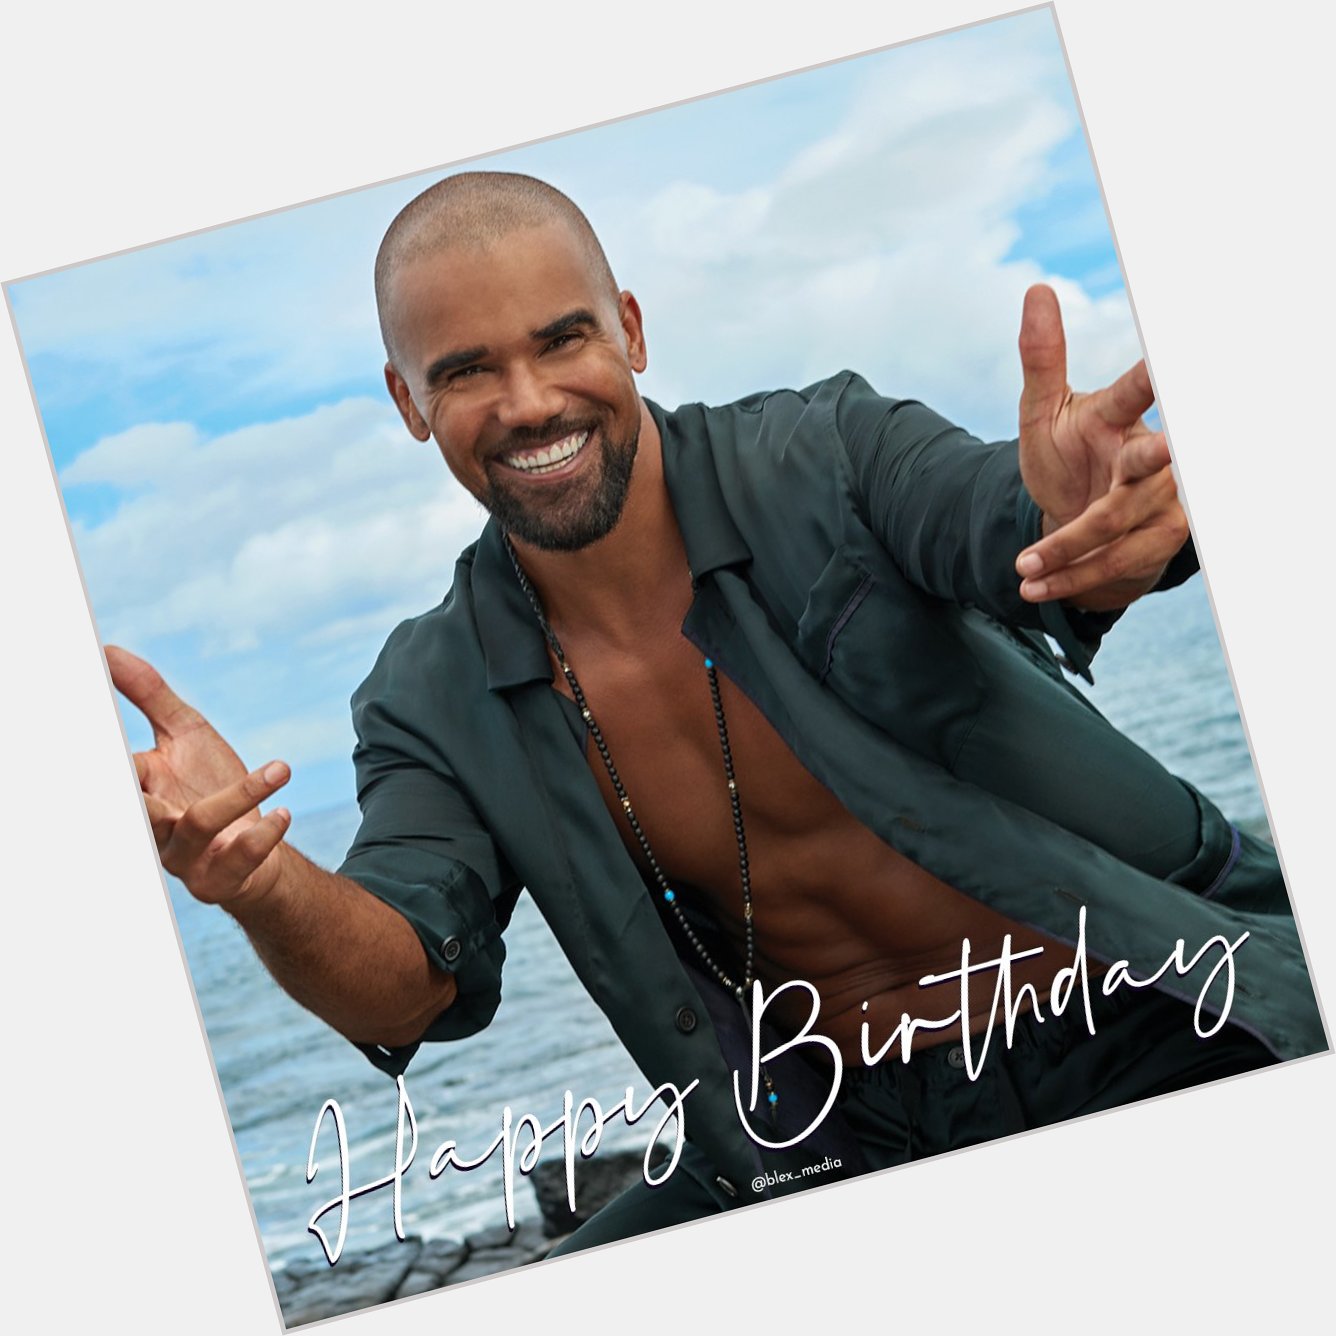 Happy 51st birthday Shemar Moore! What\s your favorite role of his?

Mine is as Derek Morgan on Criminal Minds. 